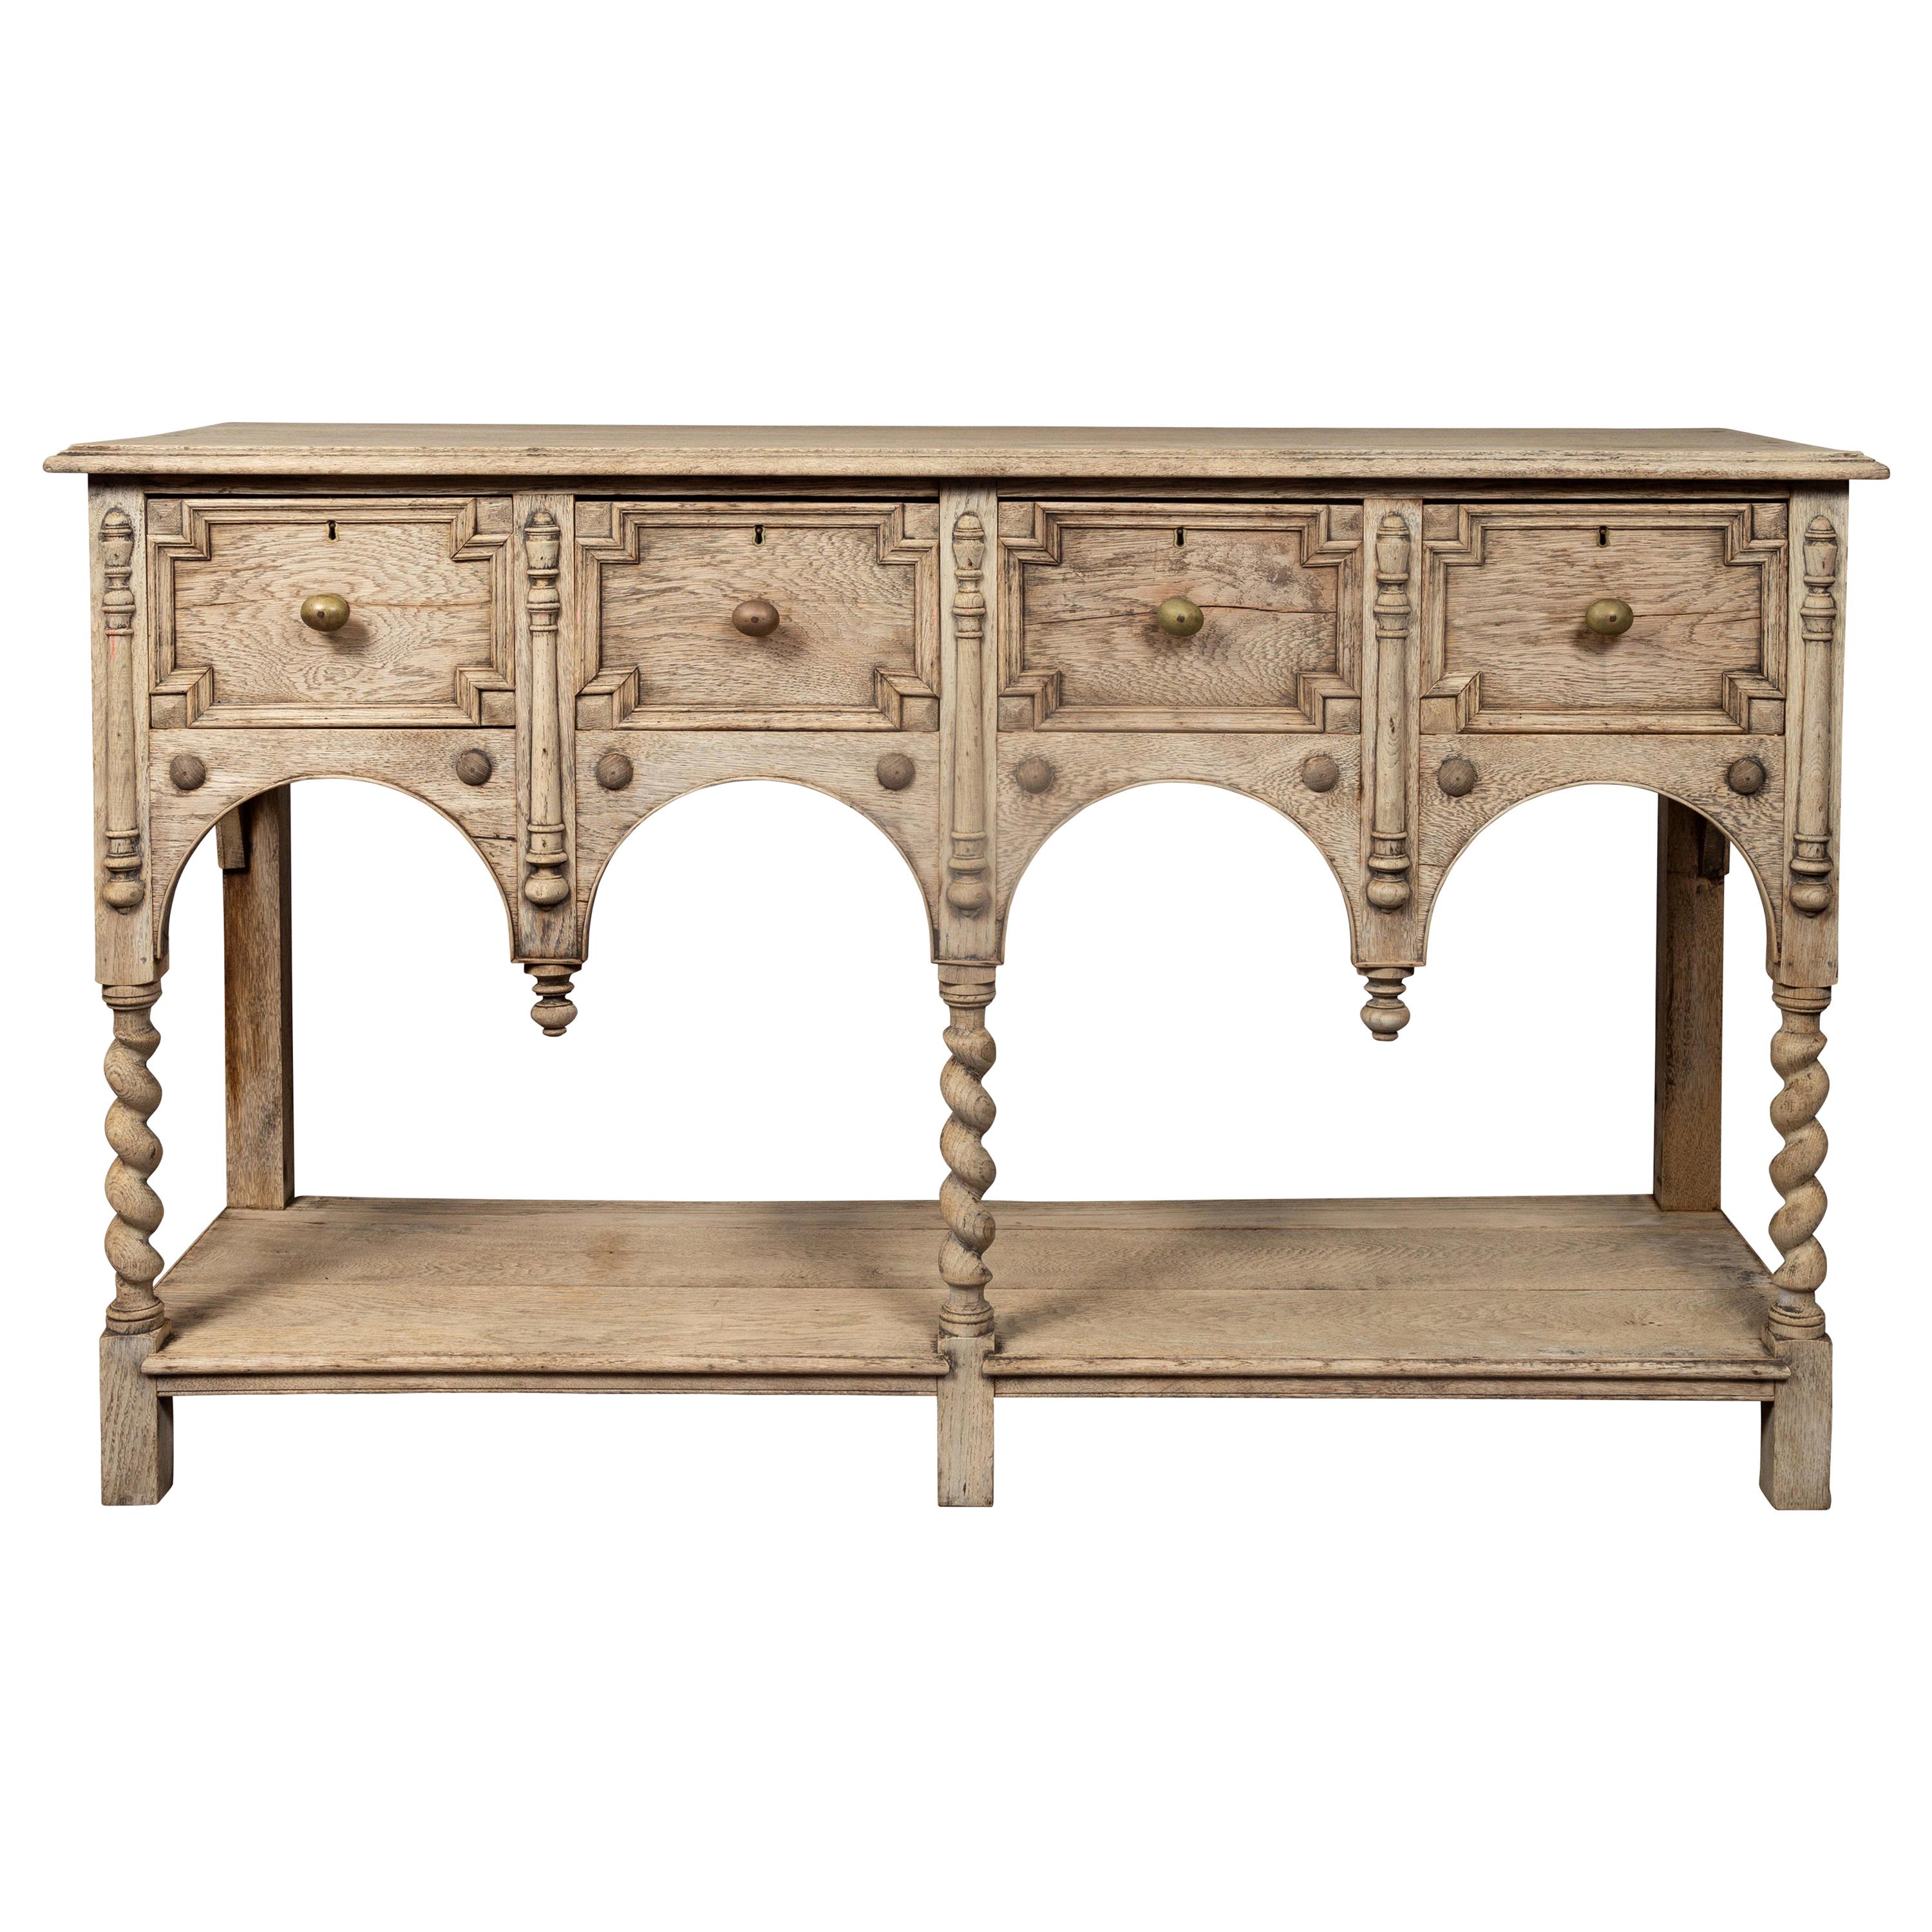 English Renaissance Revival Bleached Server with Drawers and Barley Twist Legs